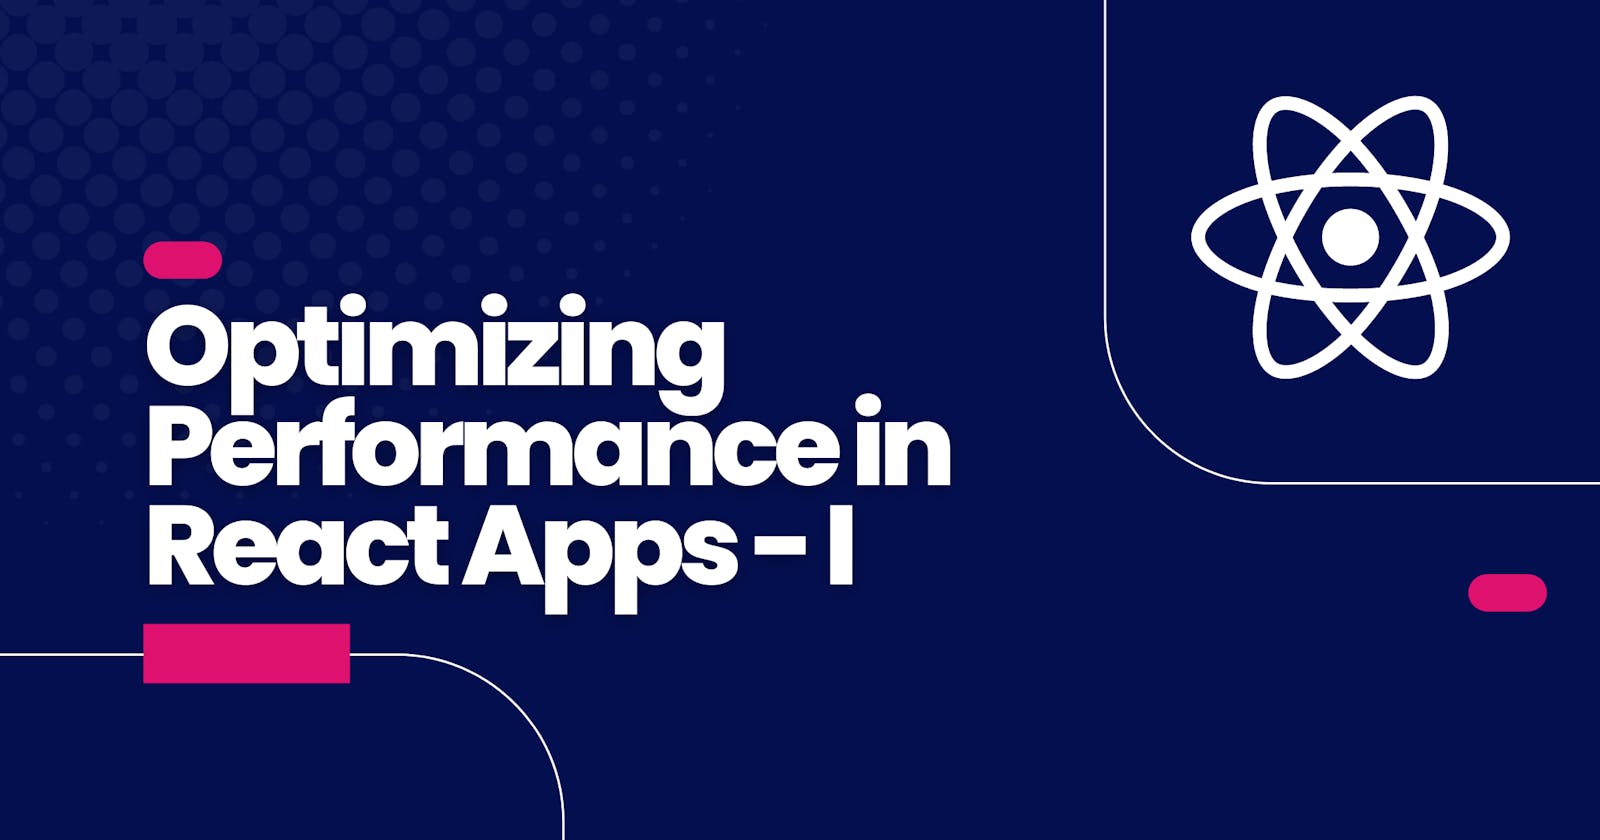 Optimizing Performance in React Apps - I